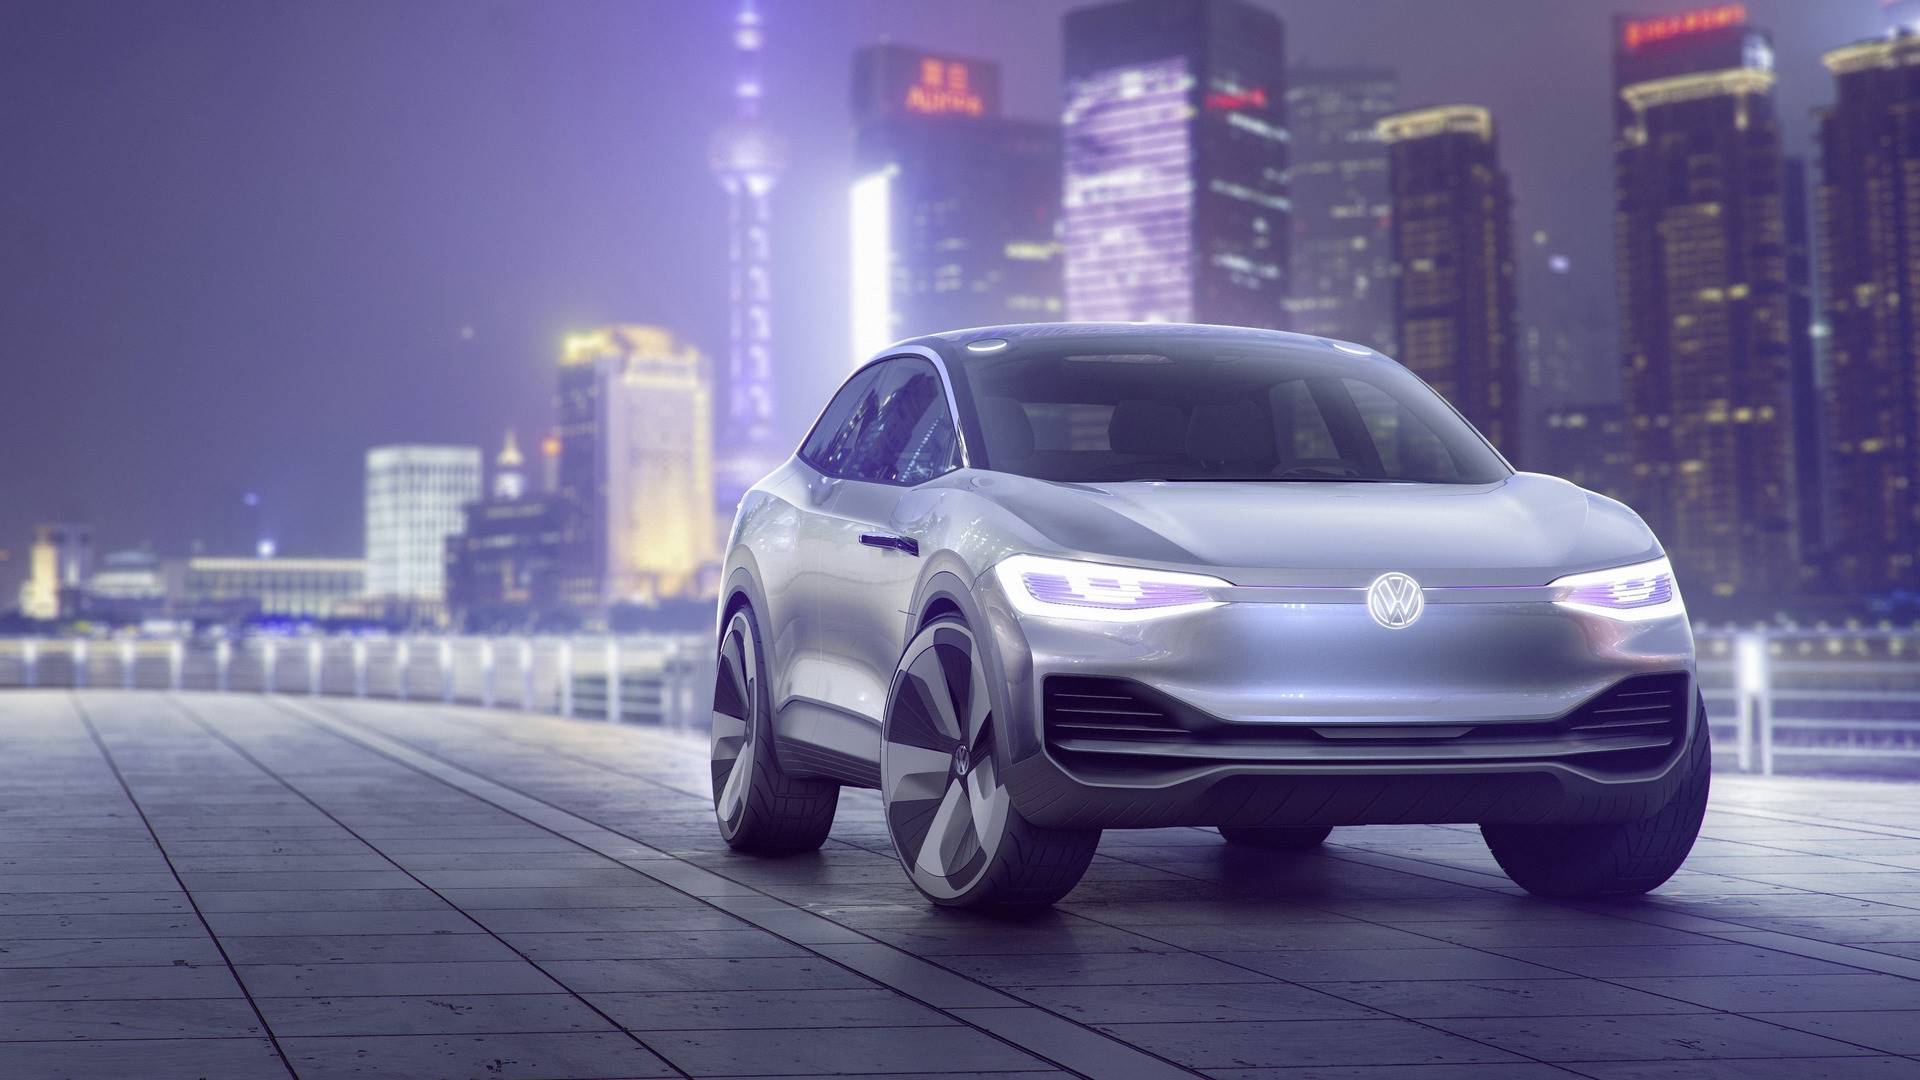 Volkswagen Partners with Microsoft on Automated Cars